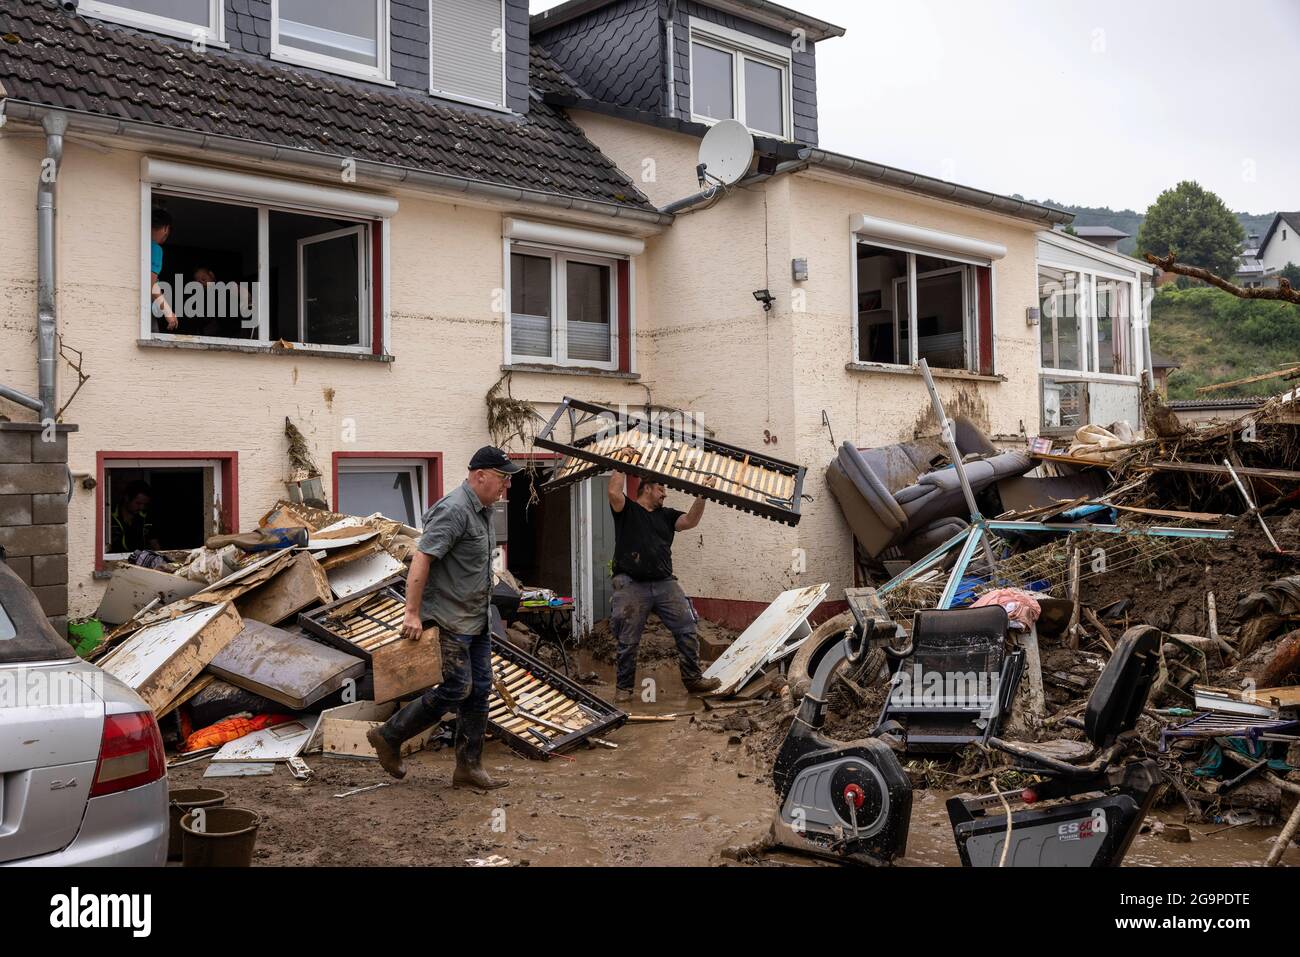 Flood disaster on the Ahr River, as seen here in Schuld in Rheinland-Pfalz in Germany. The town and the entire Ahr valley have been very badly damaged. Volunteers and relief organizations have been busy for days with the cleanup work, which will continue for months and years. Stock Photo